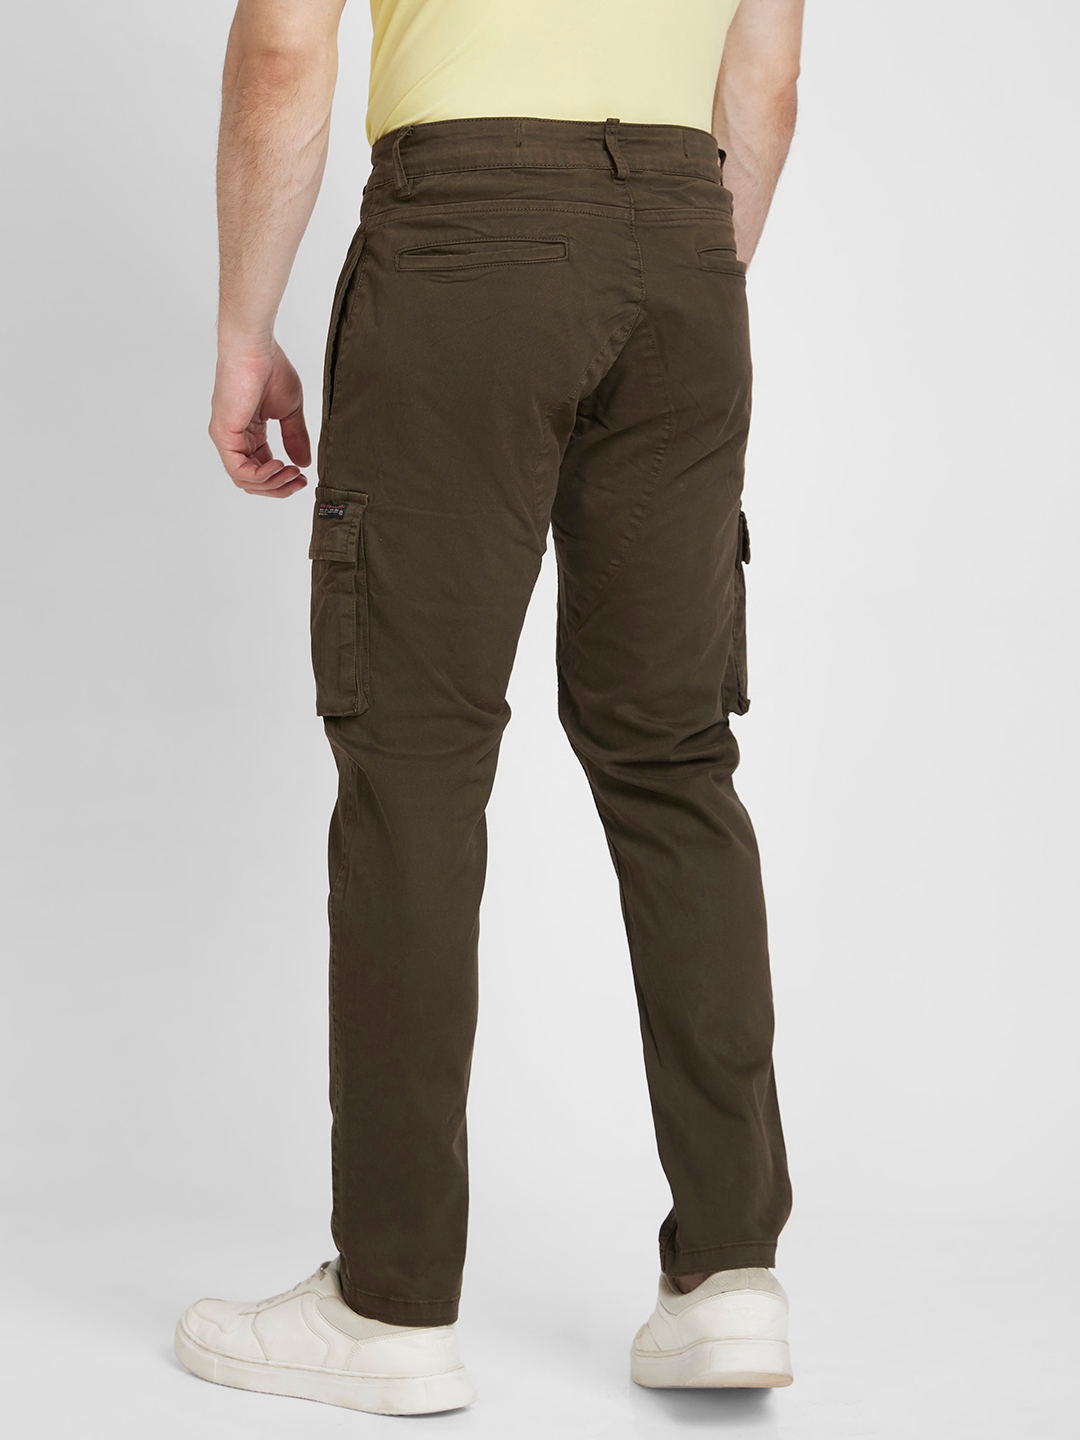 Buy Cream Trousers & Pants for Men by TADEO Online | Ajio.com